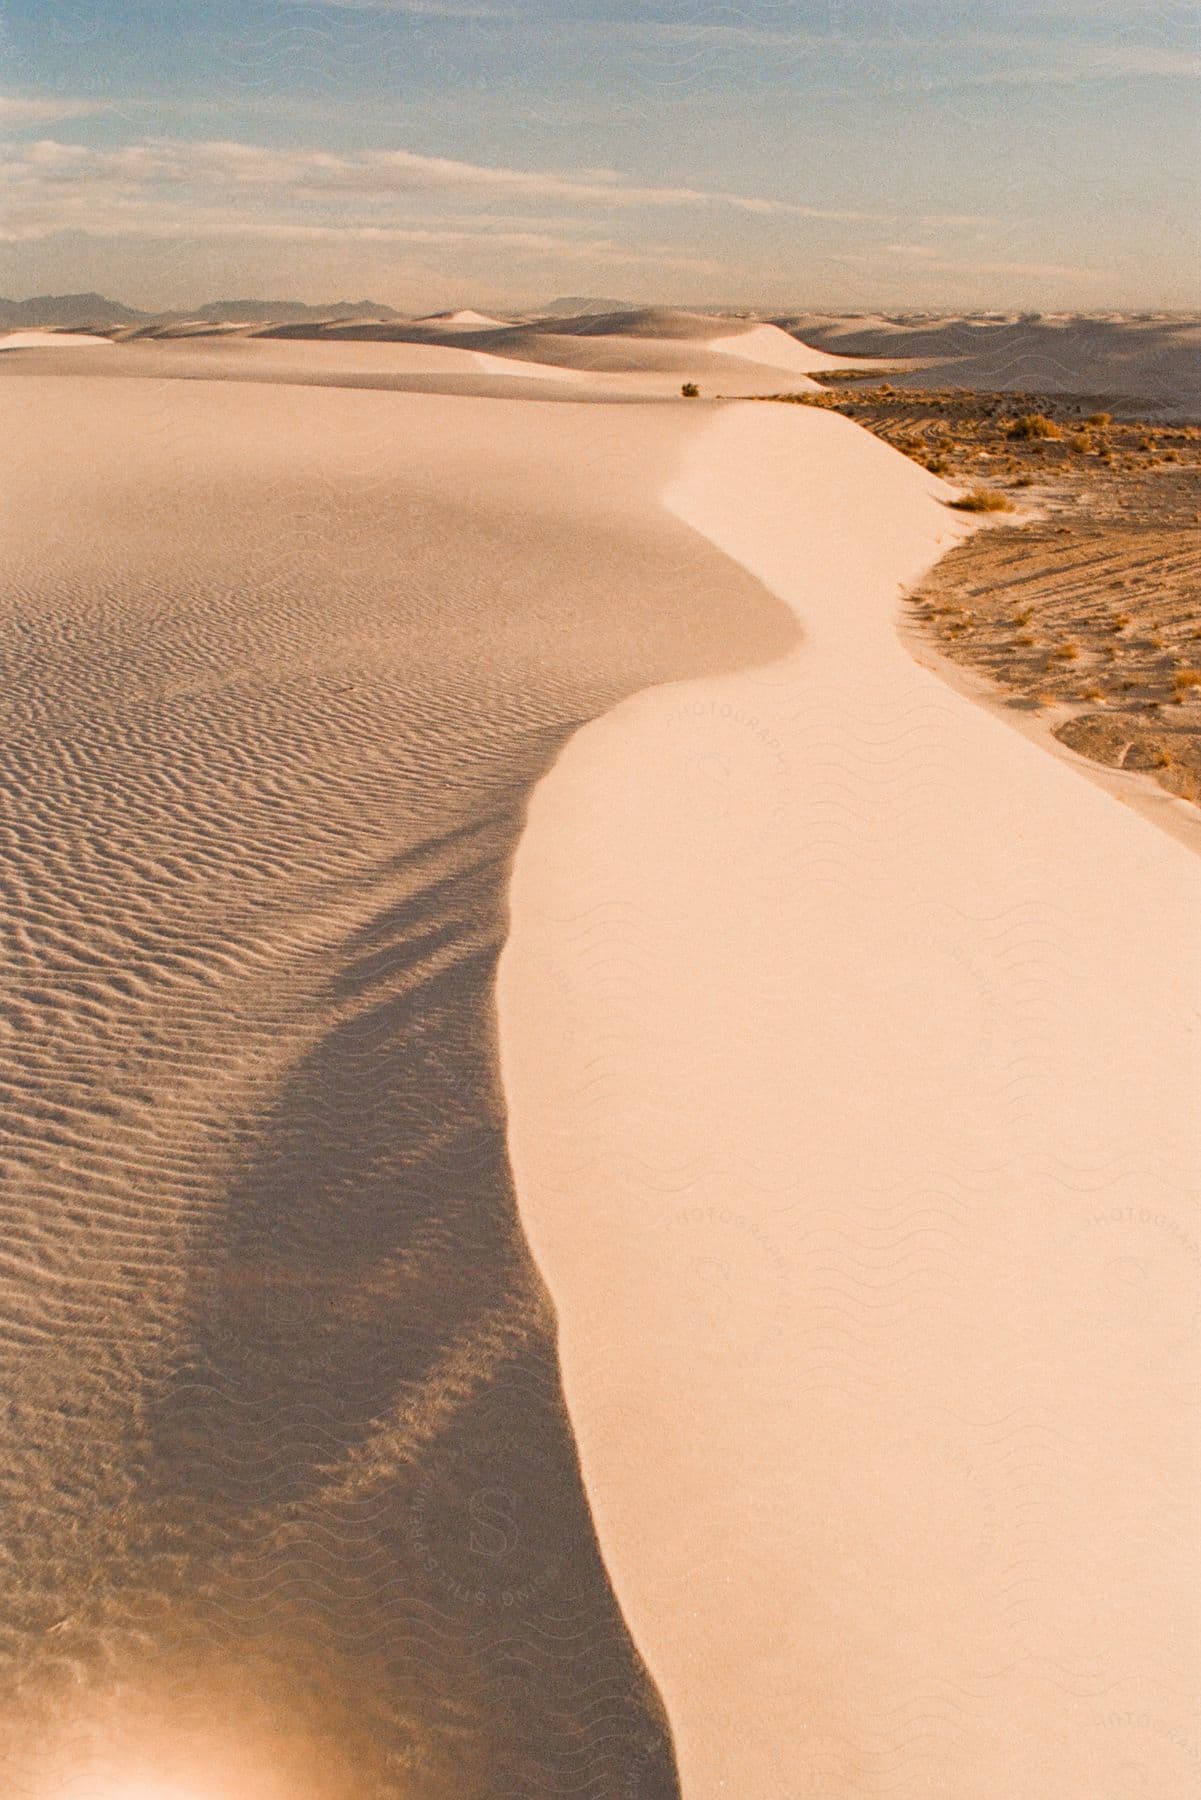 A desert with ripples in the sand and sand dunes in the distance.